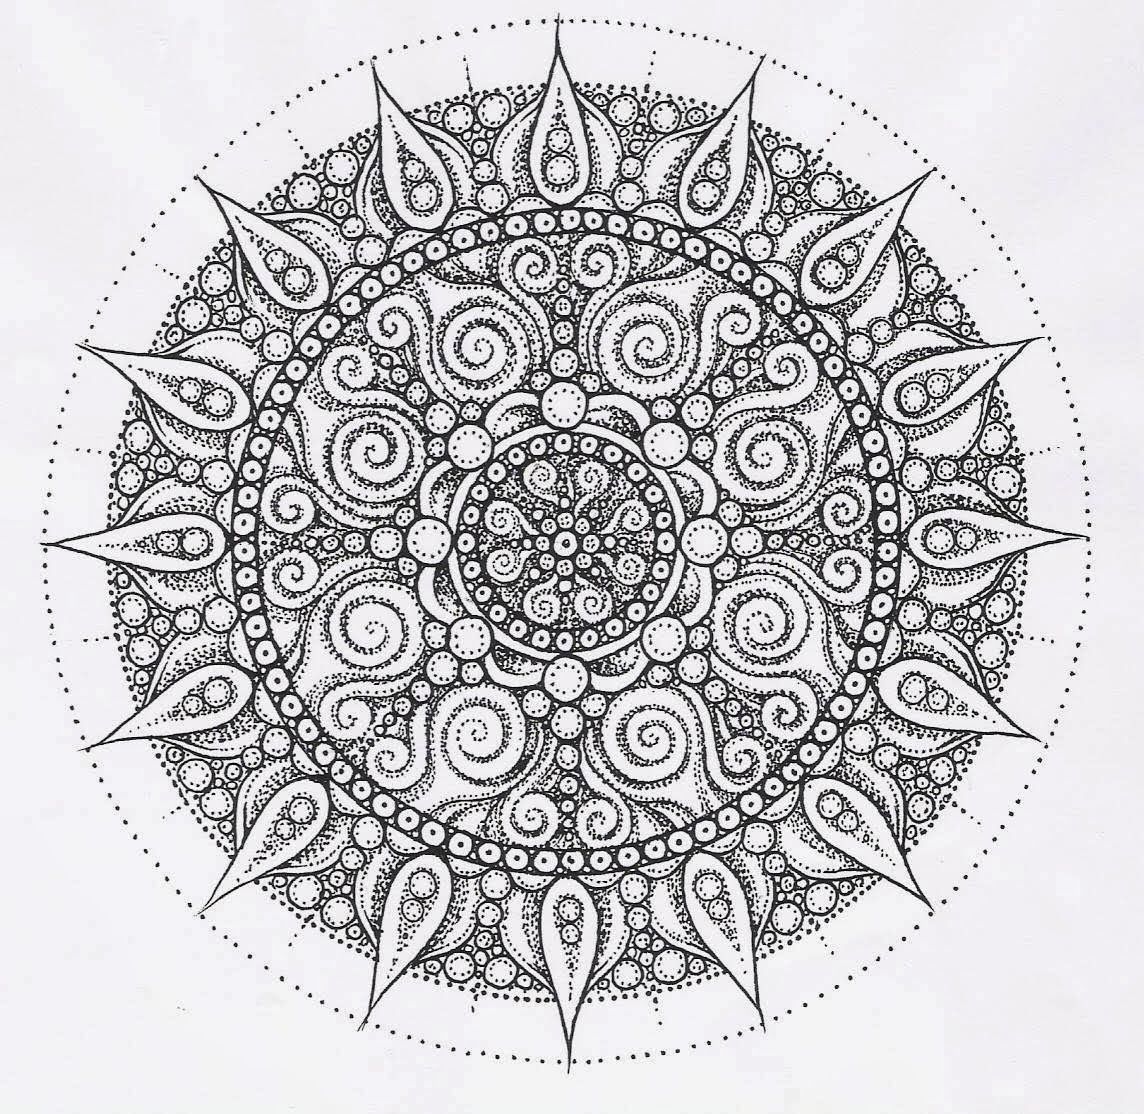 Printable Free Flower Mandalas Coloring Pages |Free coloring on Clipart Library